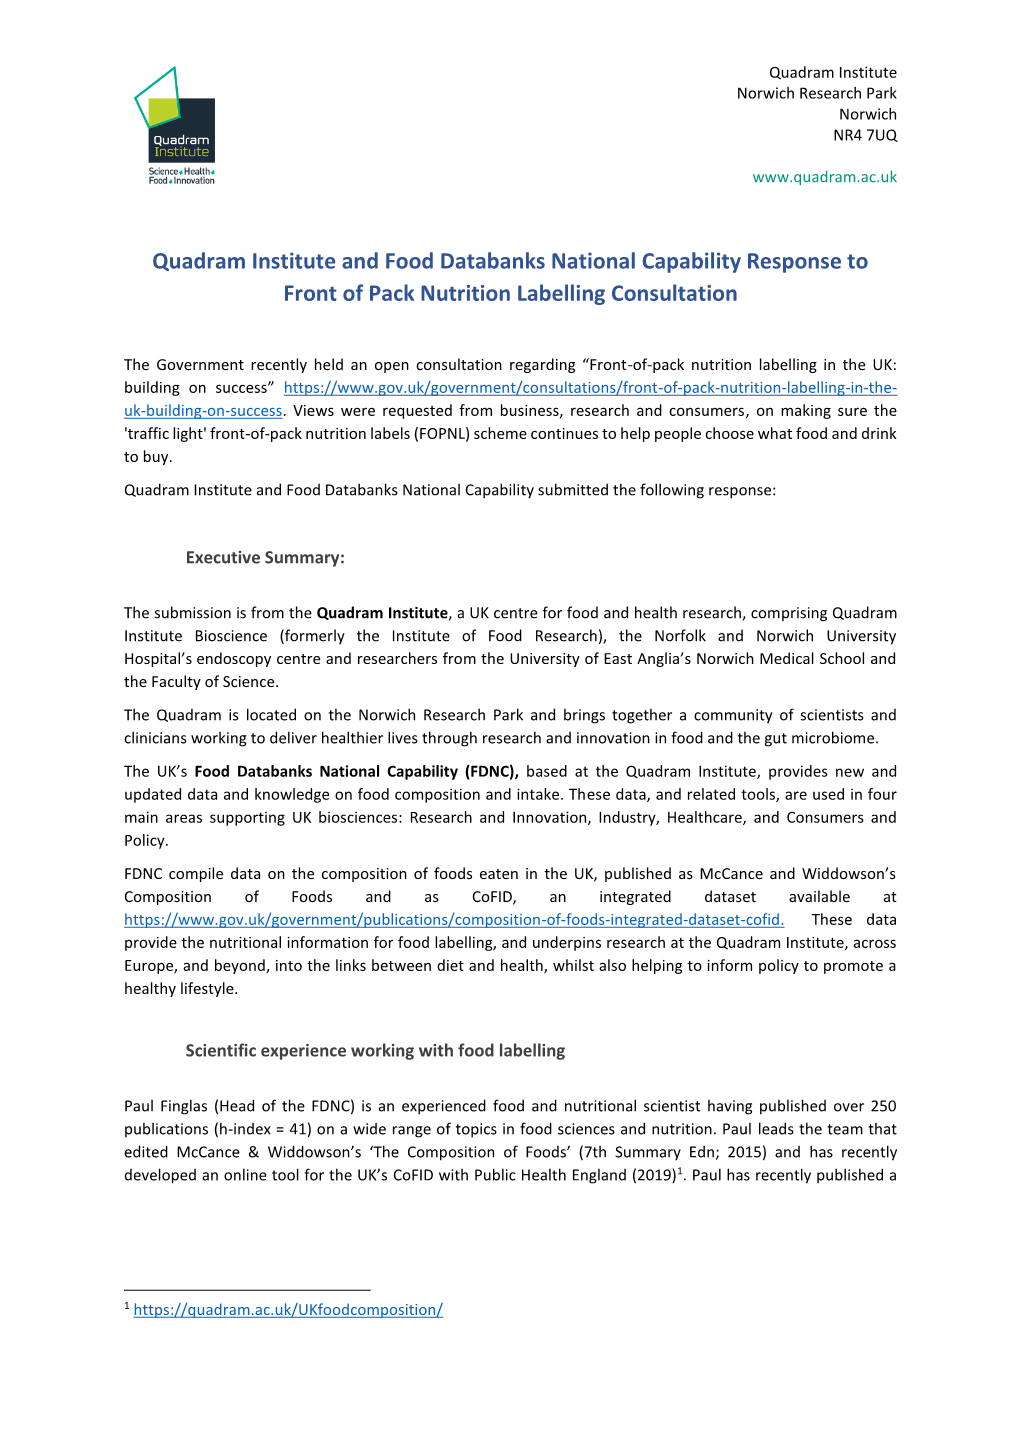 Quadram Institute and Food Databanks National Capability Response to Front of Pack Nutrition Labelling Consultation